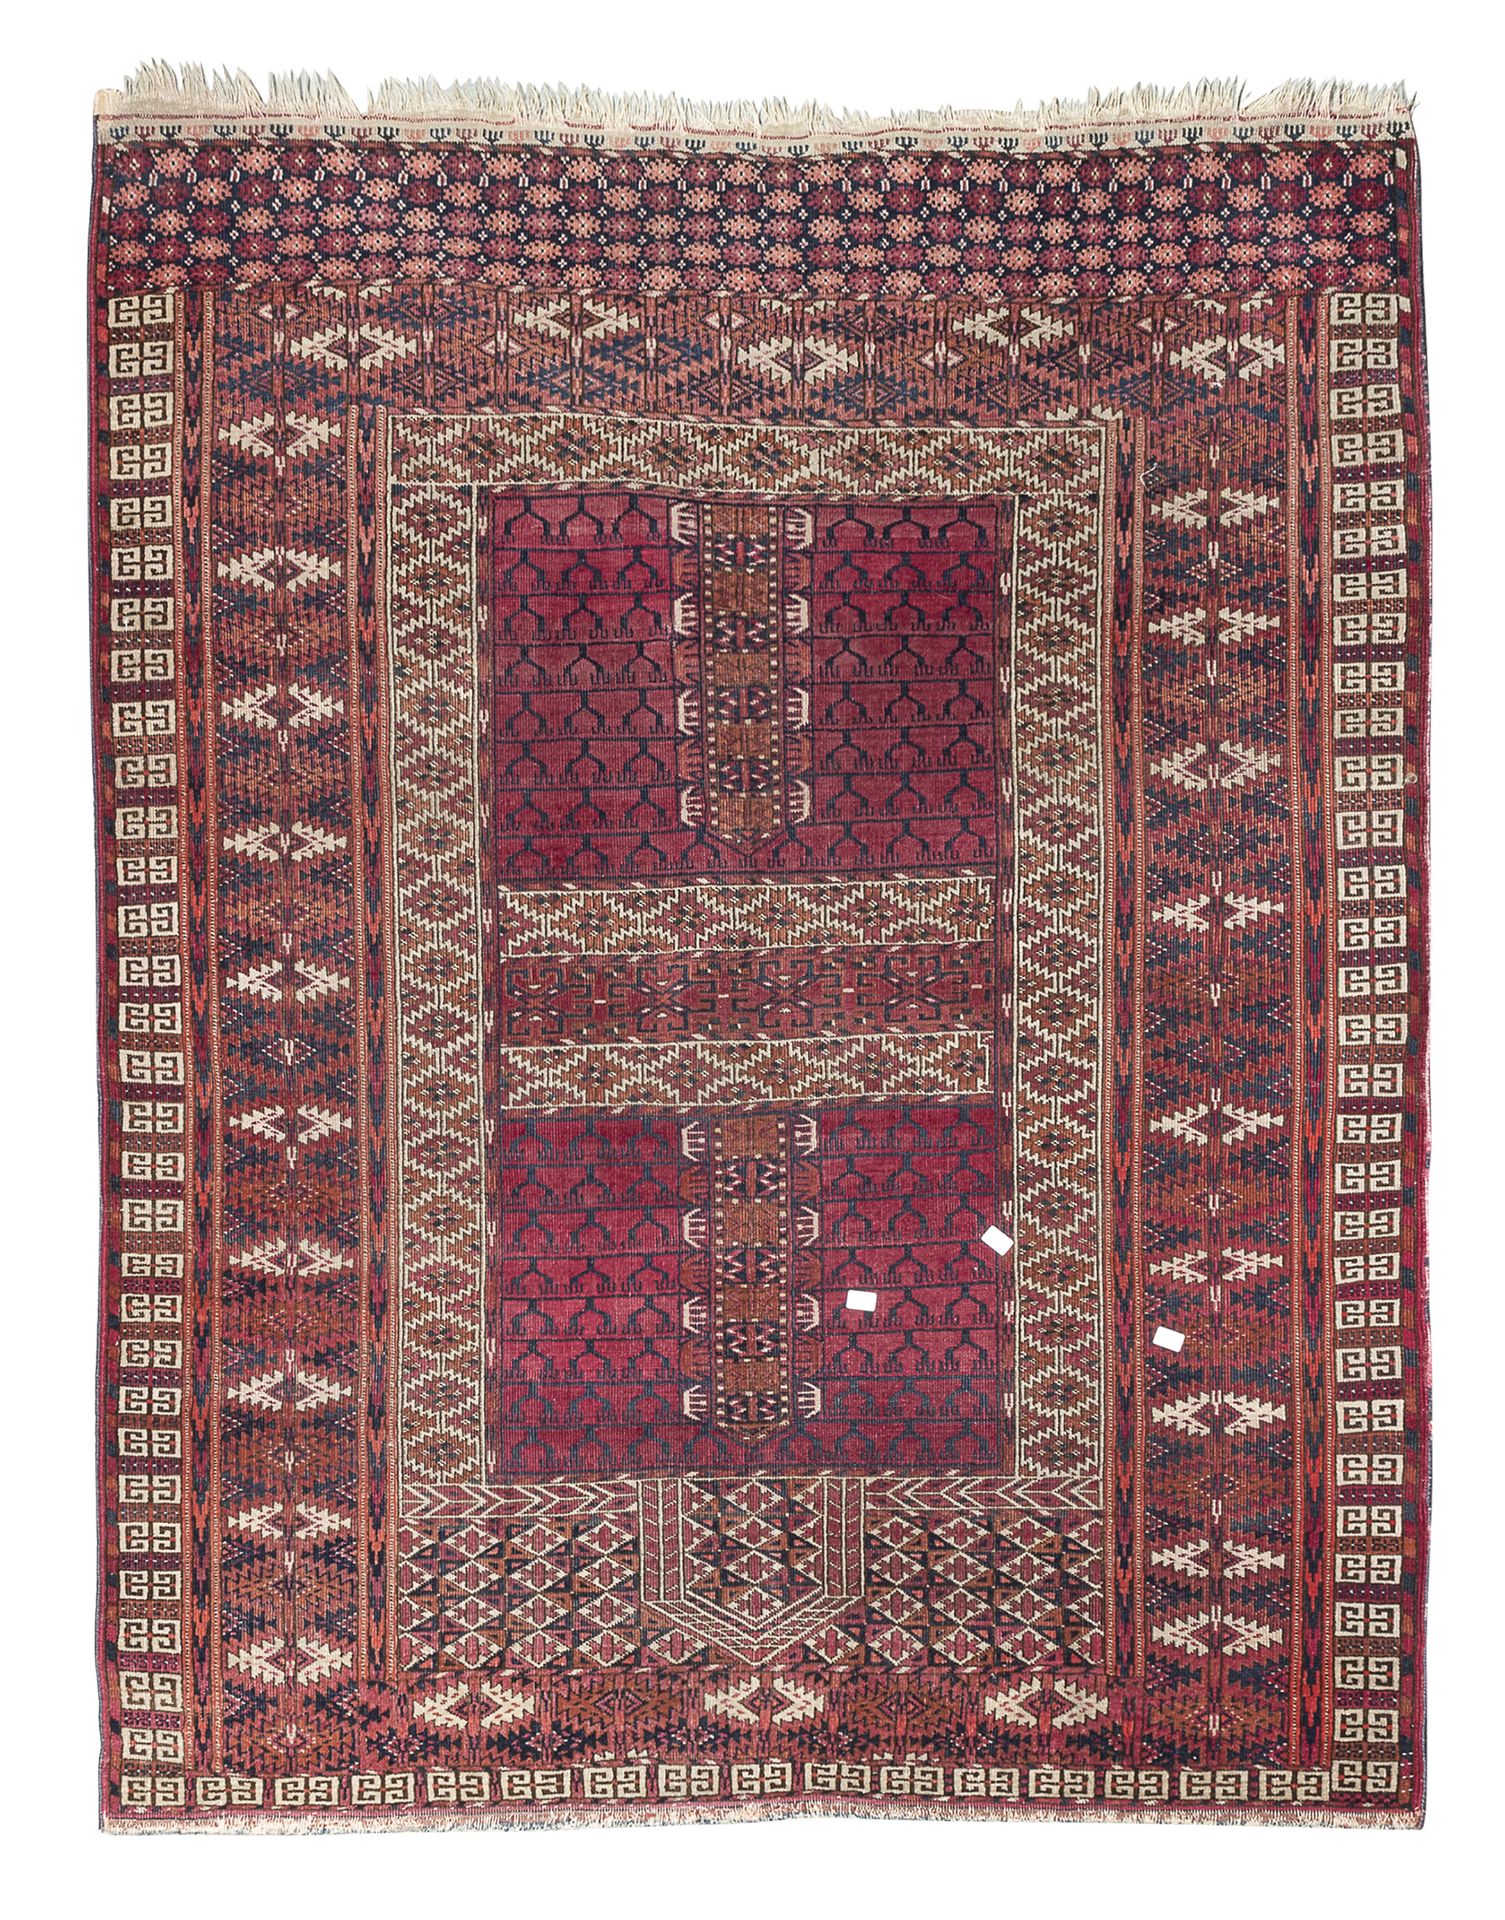 RARE YOMUT CARPET END OF THE 19TH CENTURY